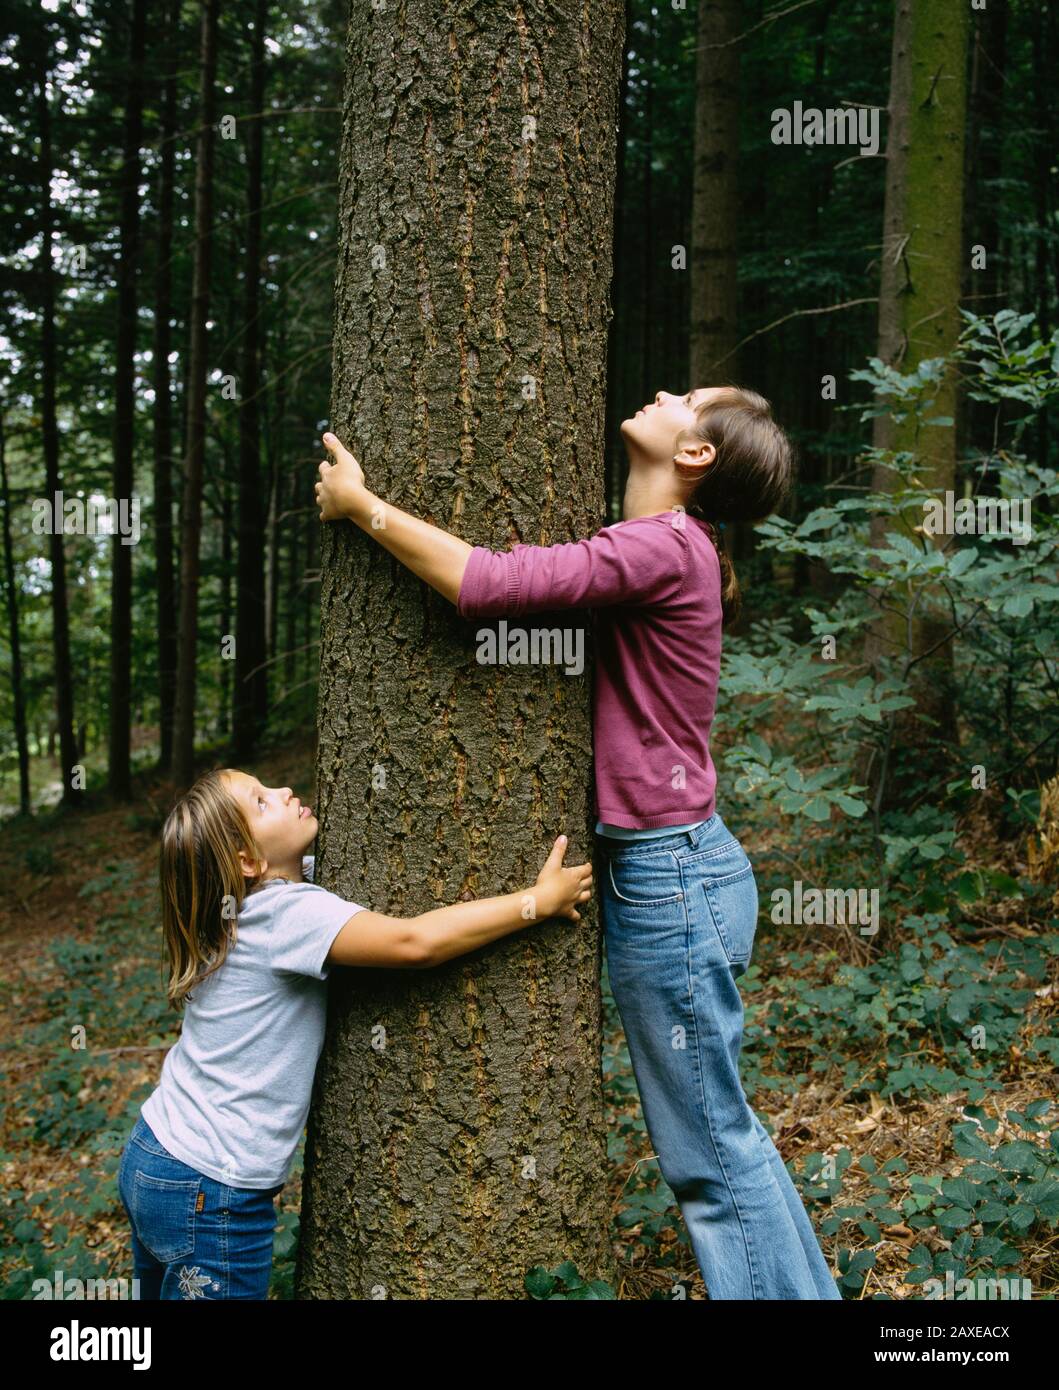 Side profile of a girl and a teenage girl hugging a tree, Germany Stock Photo